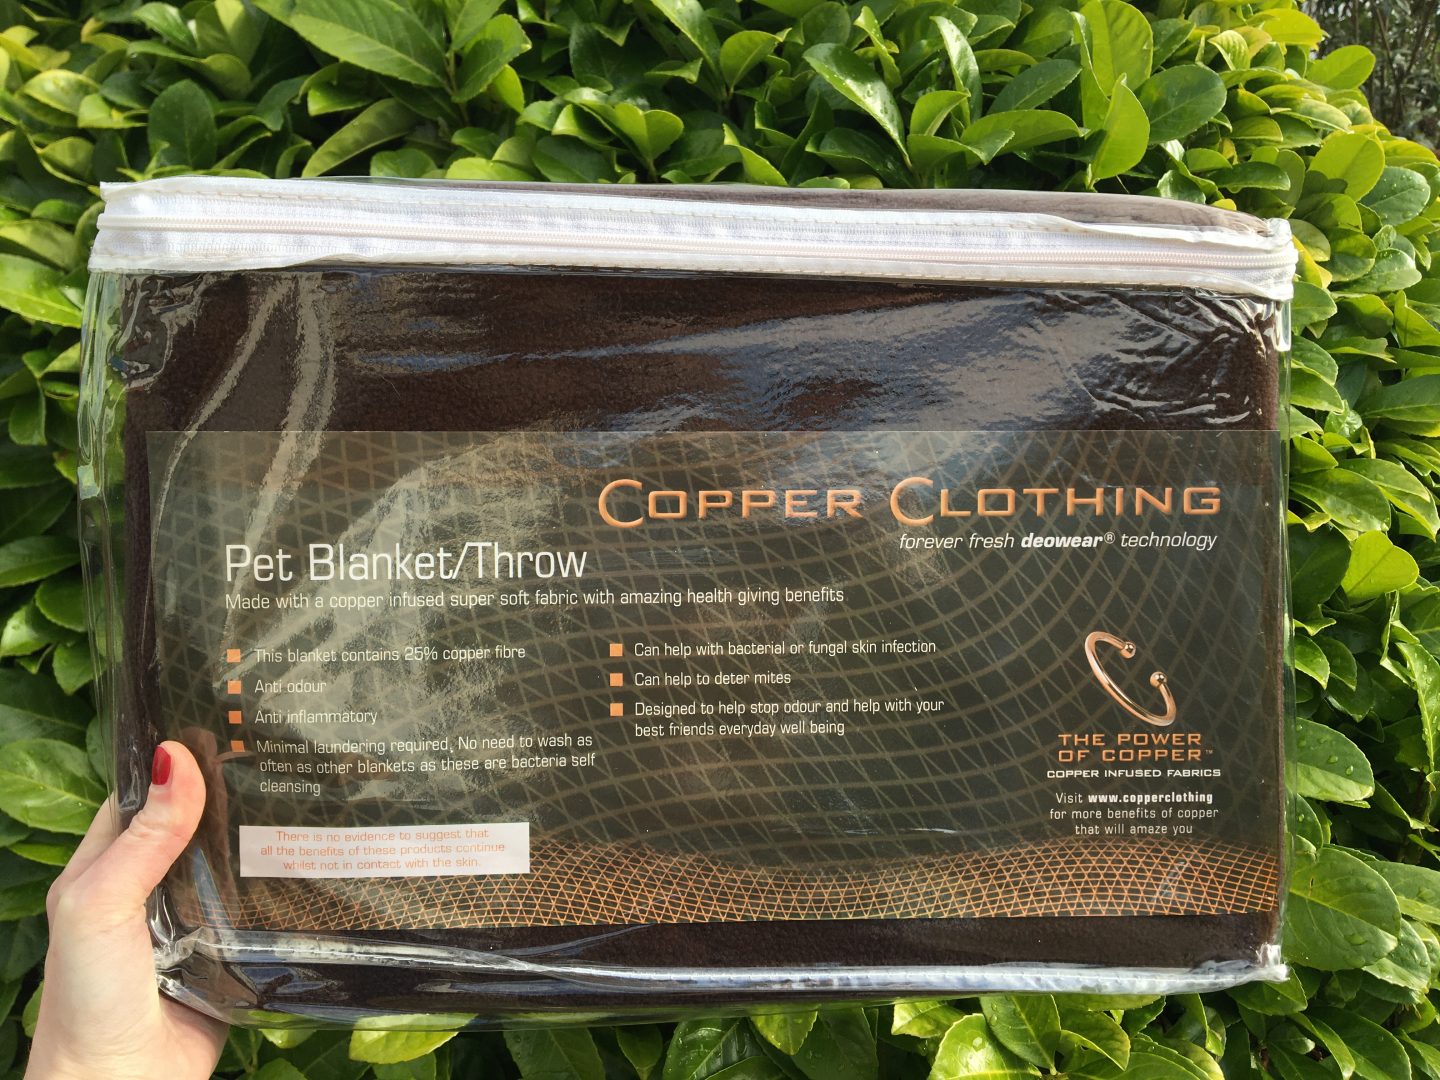 A close-up photo of the Copper Clothing pet blanket I was gifted for this review. It's inside the bag it comes in when I received it, which is clear with a white zipper around the top. The blanket itself is brown.